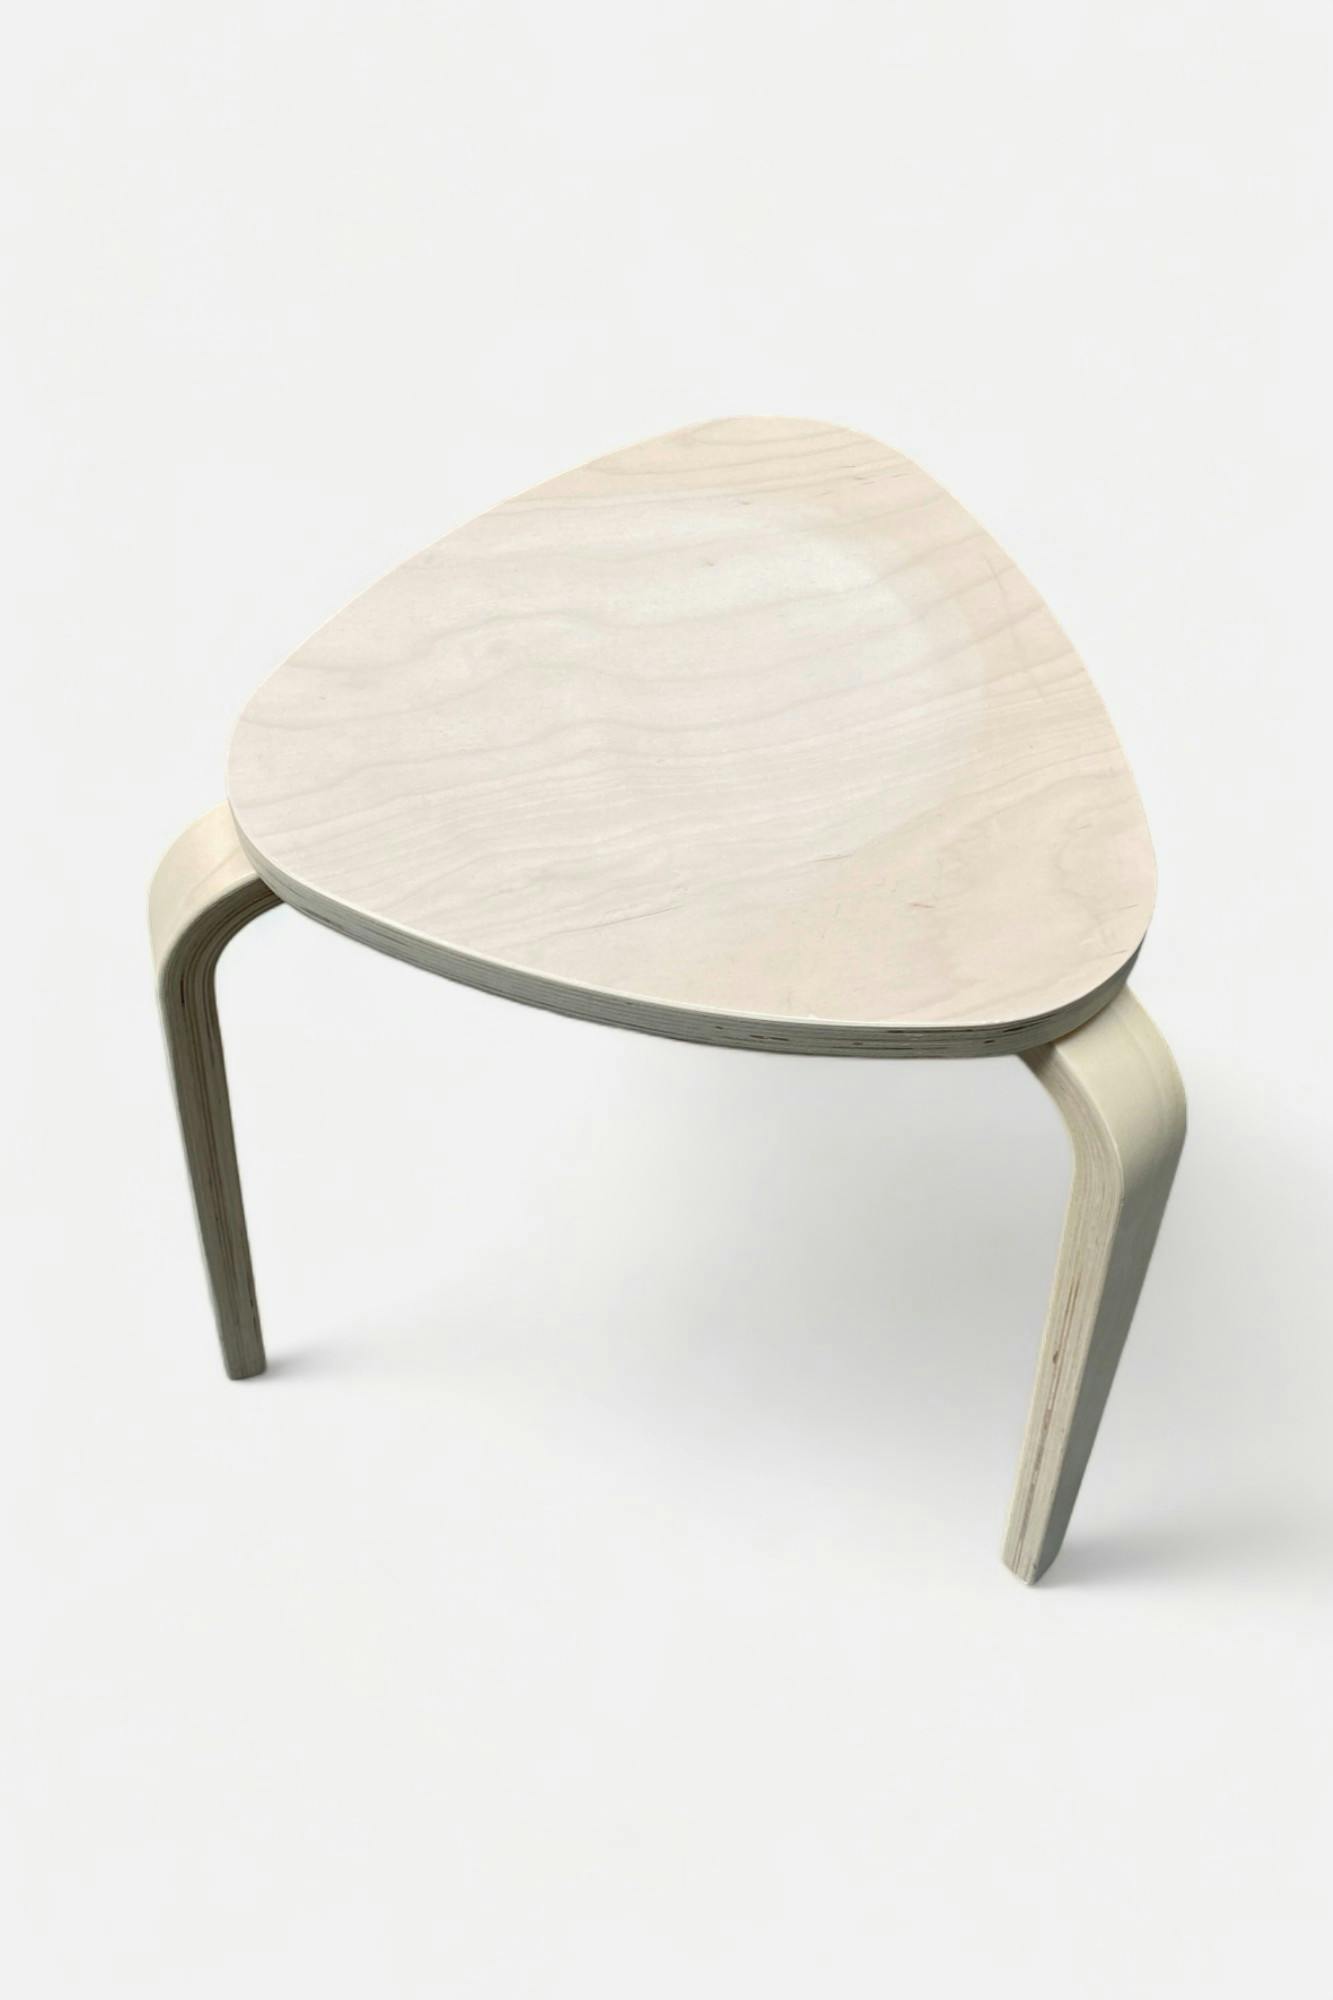 IKEA Kyrre wood stool - Second hand quality "Chairs" - Relieve Furniture